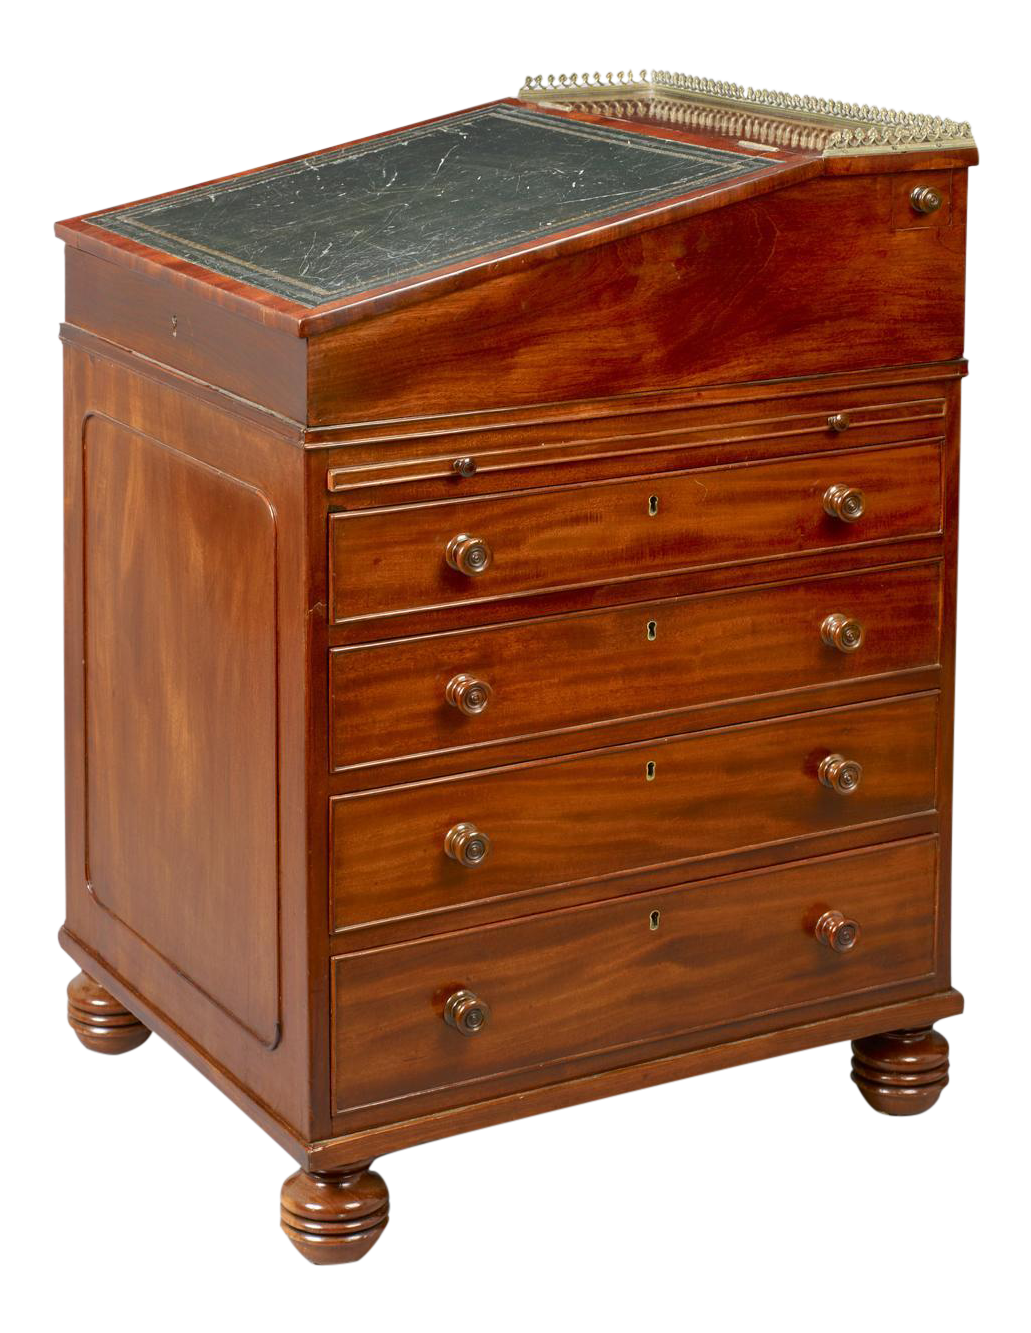 Davenport Desk Picture PNG Image High Quality PNG Image